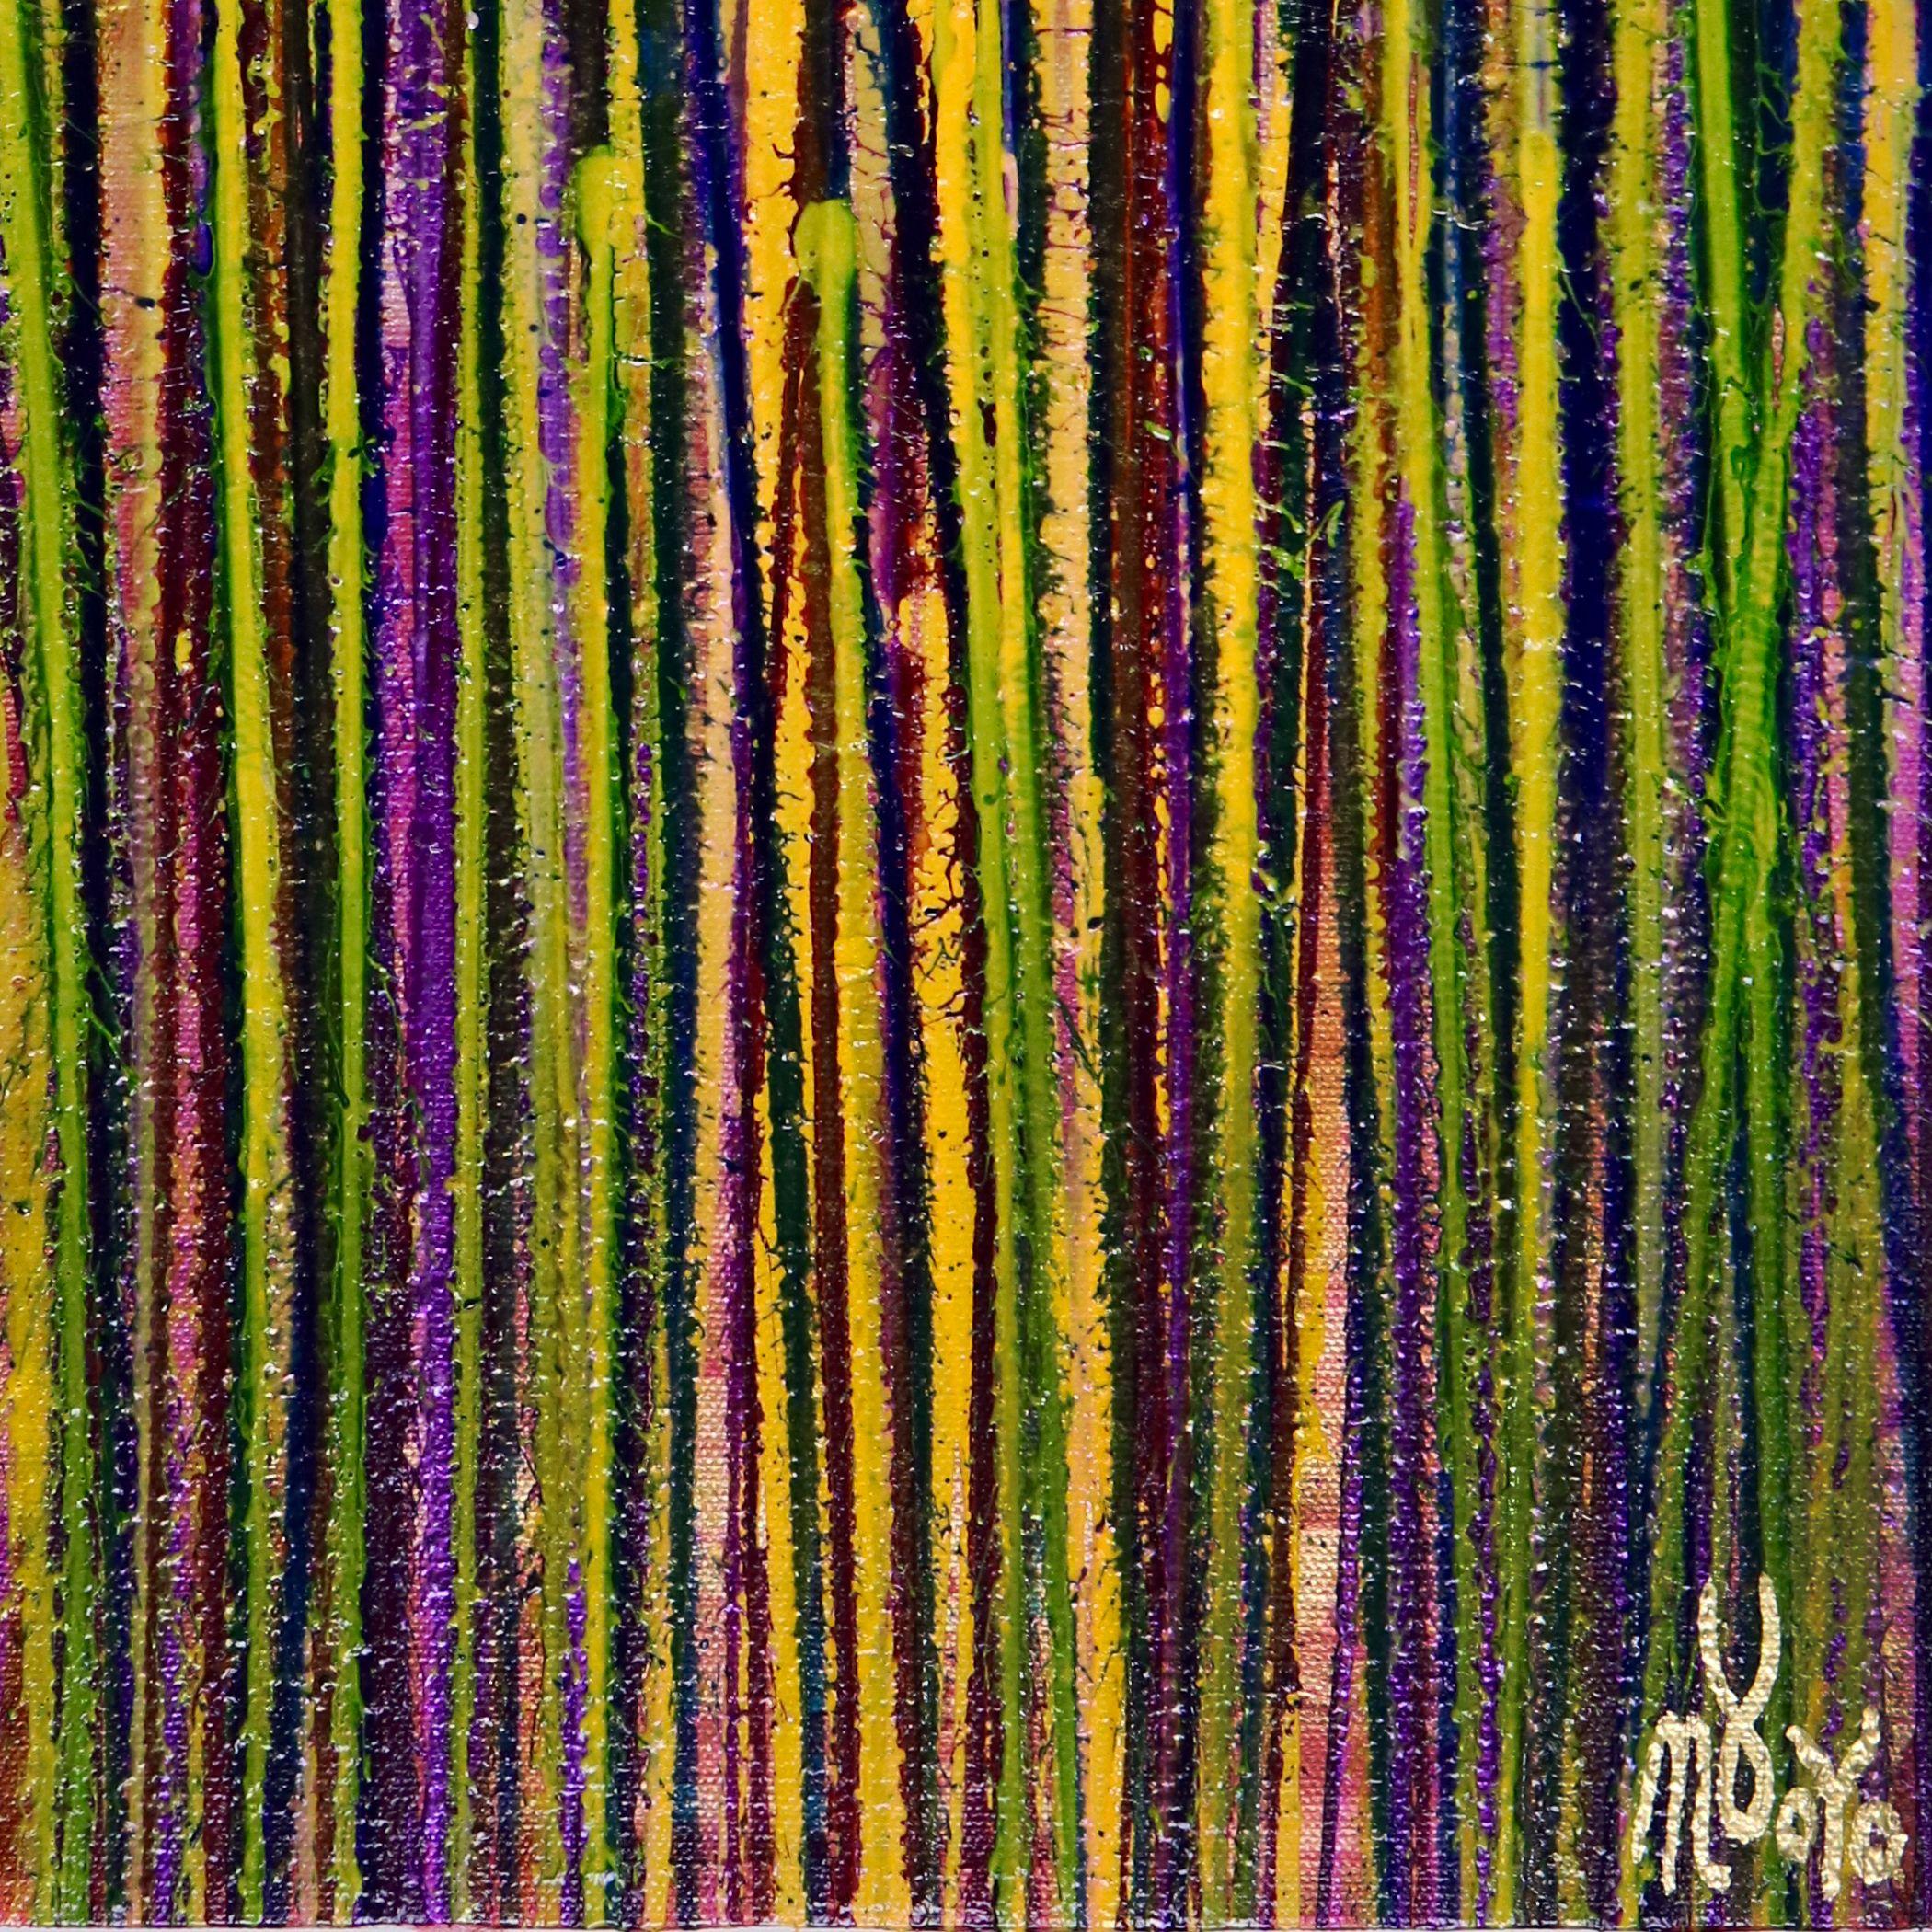 Three canvases16 W x 20 H x 0.7 in each.    Expressive modern abstract, bold full of life, gloss and shimmer! inspired by nature, many colors combined with mica particles. Yellow, blue, purple, gold, clear paint over iridescent mauve. Ready to hang